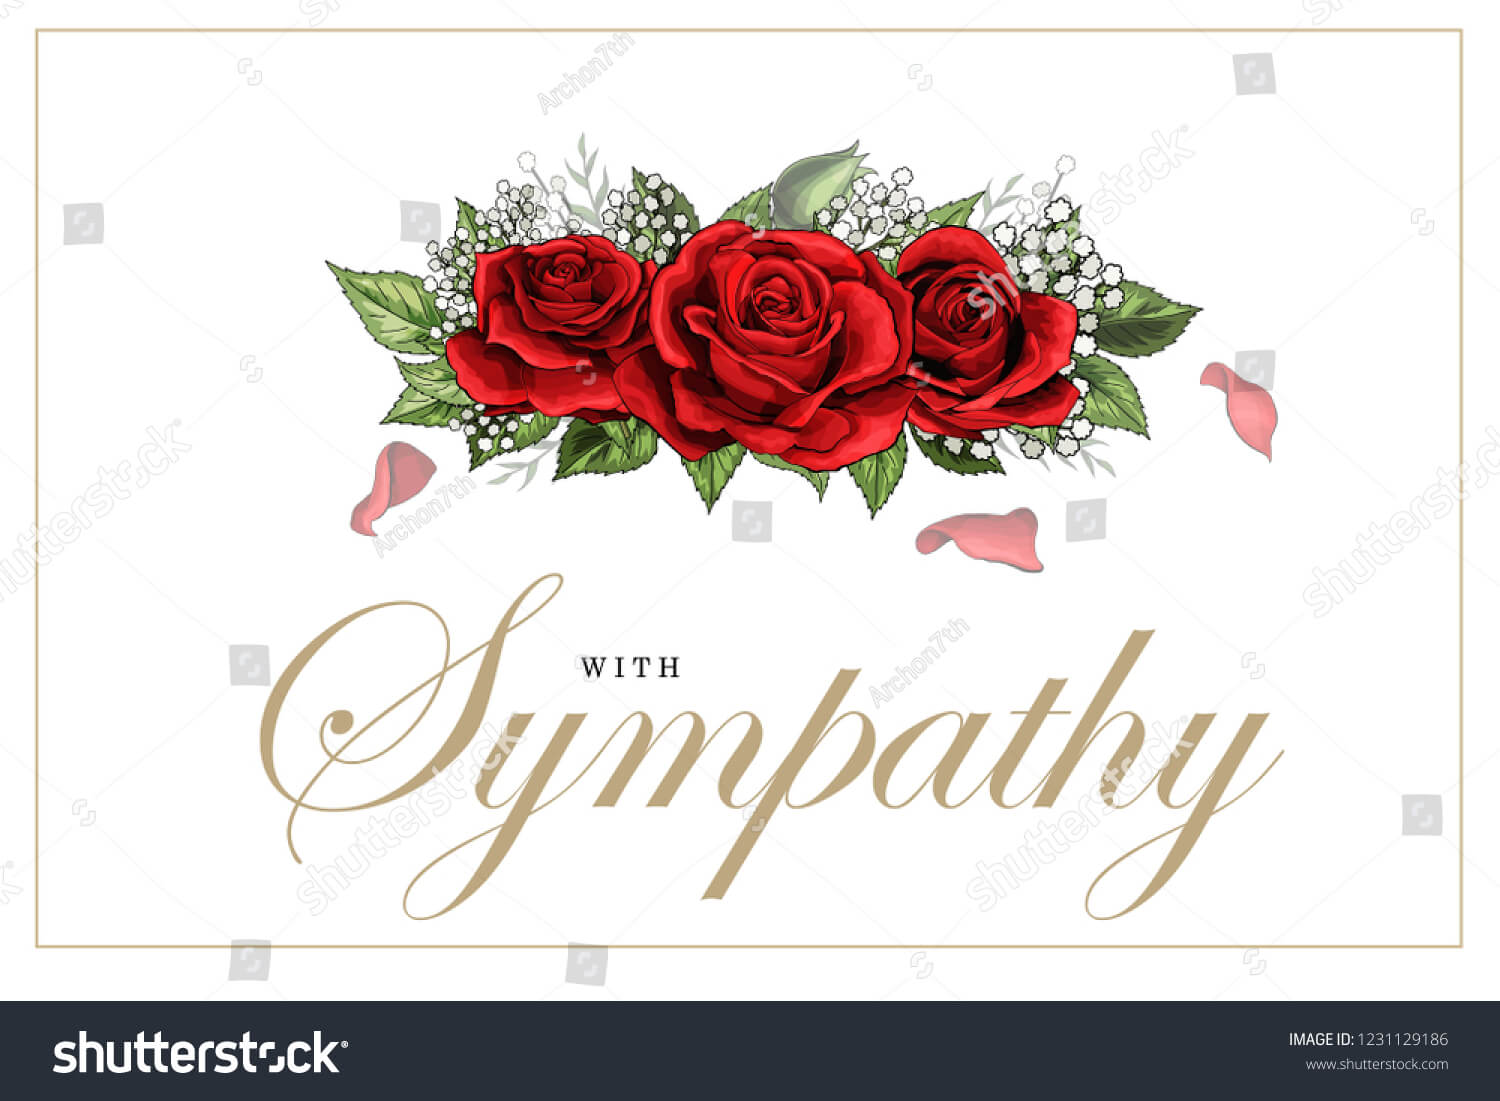 Condolences Sympathy Card Floral Red Roses Stock Vector For Sympathy Card Template